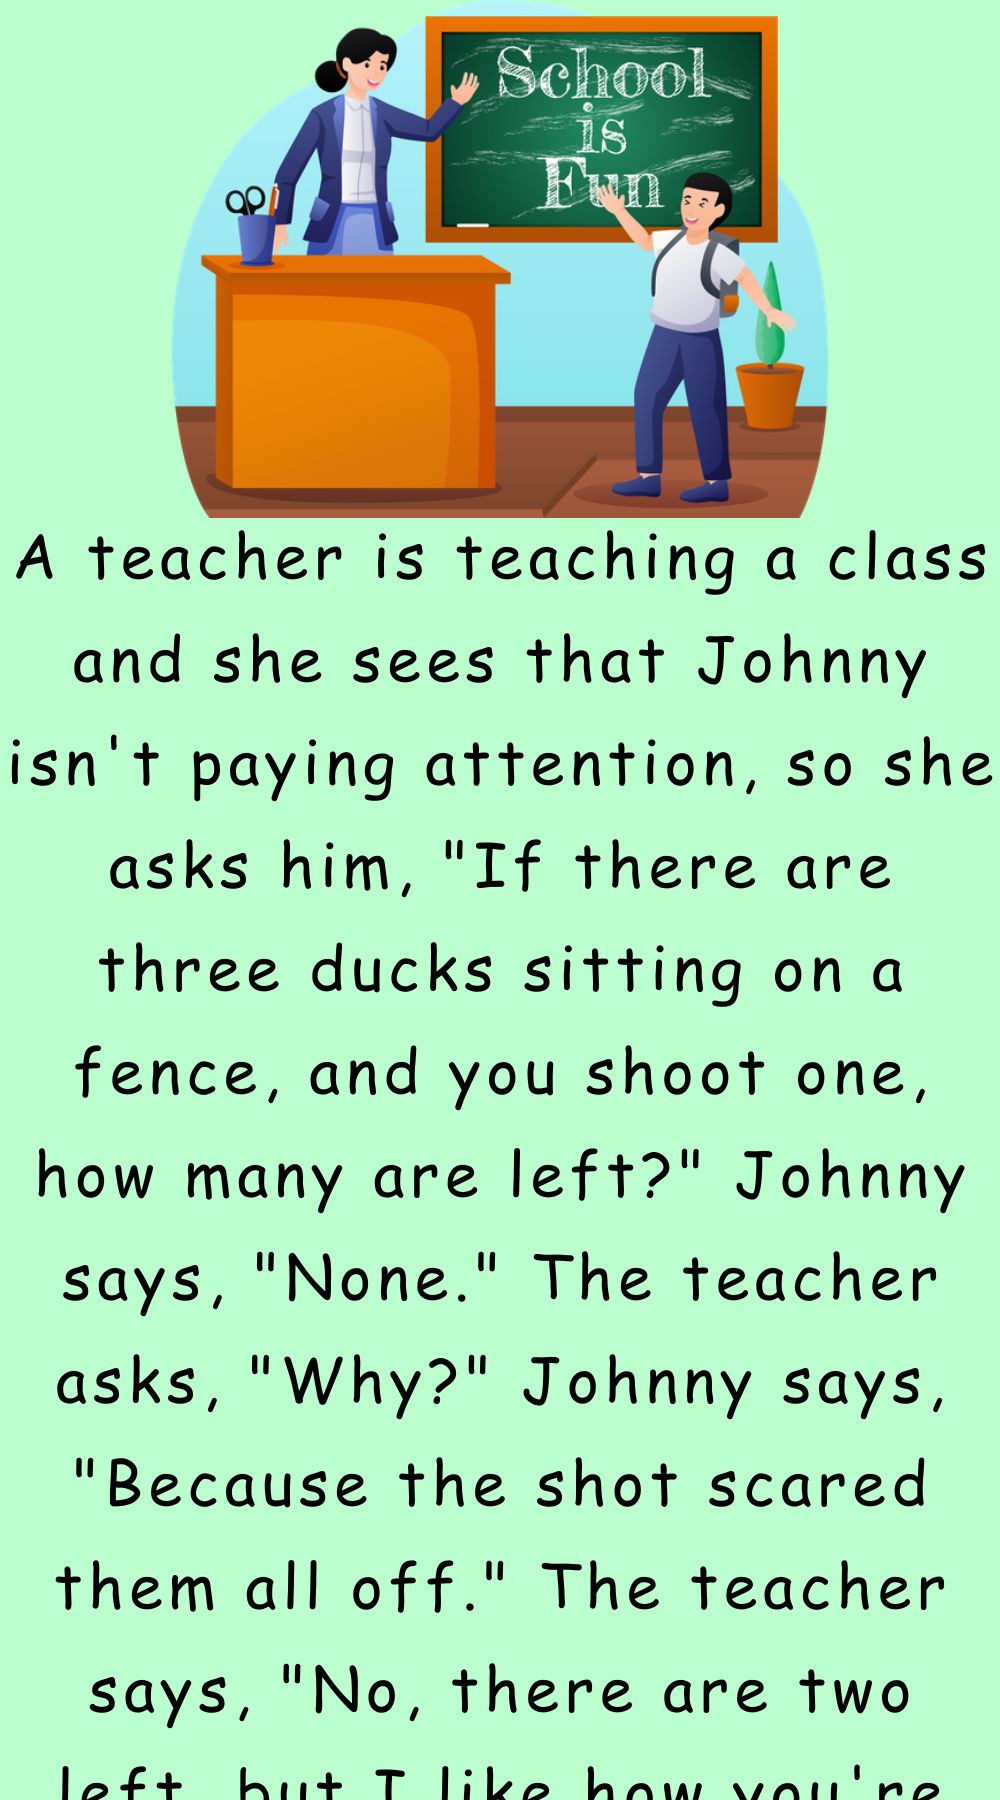 A teacher is teaching a class and she sees that Johnny